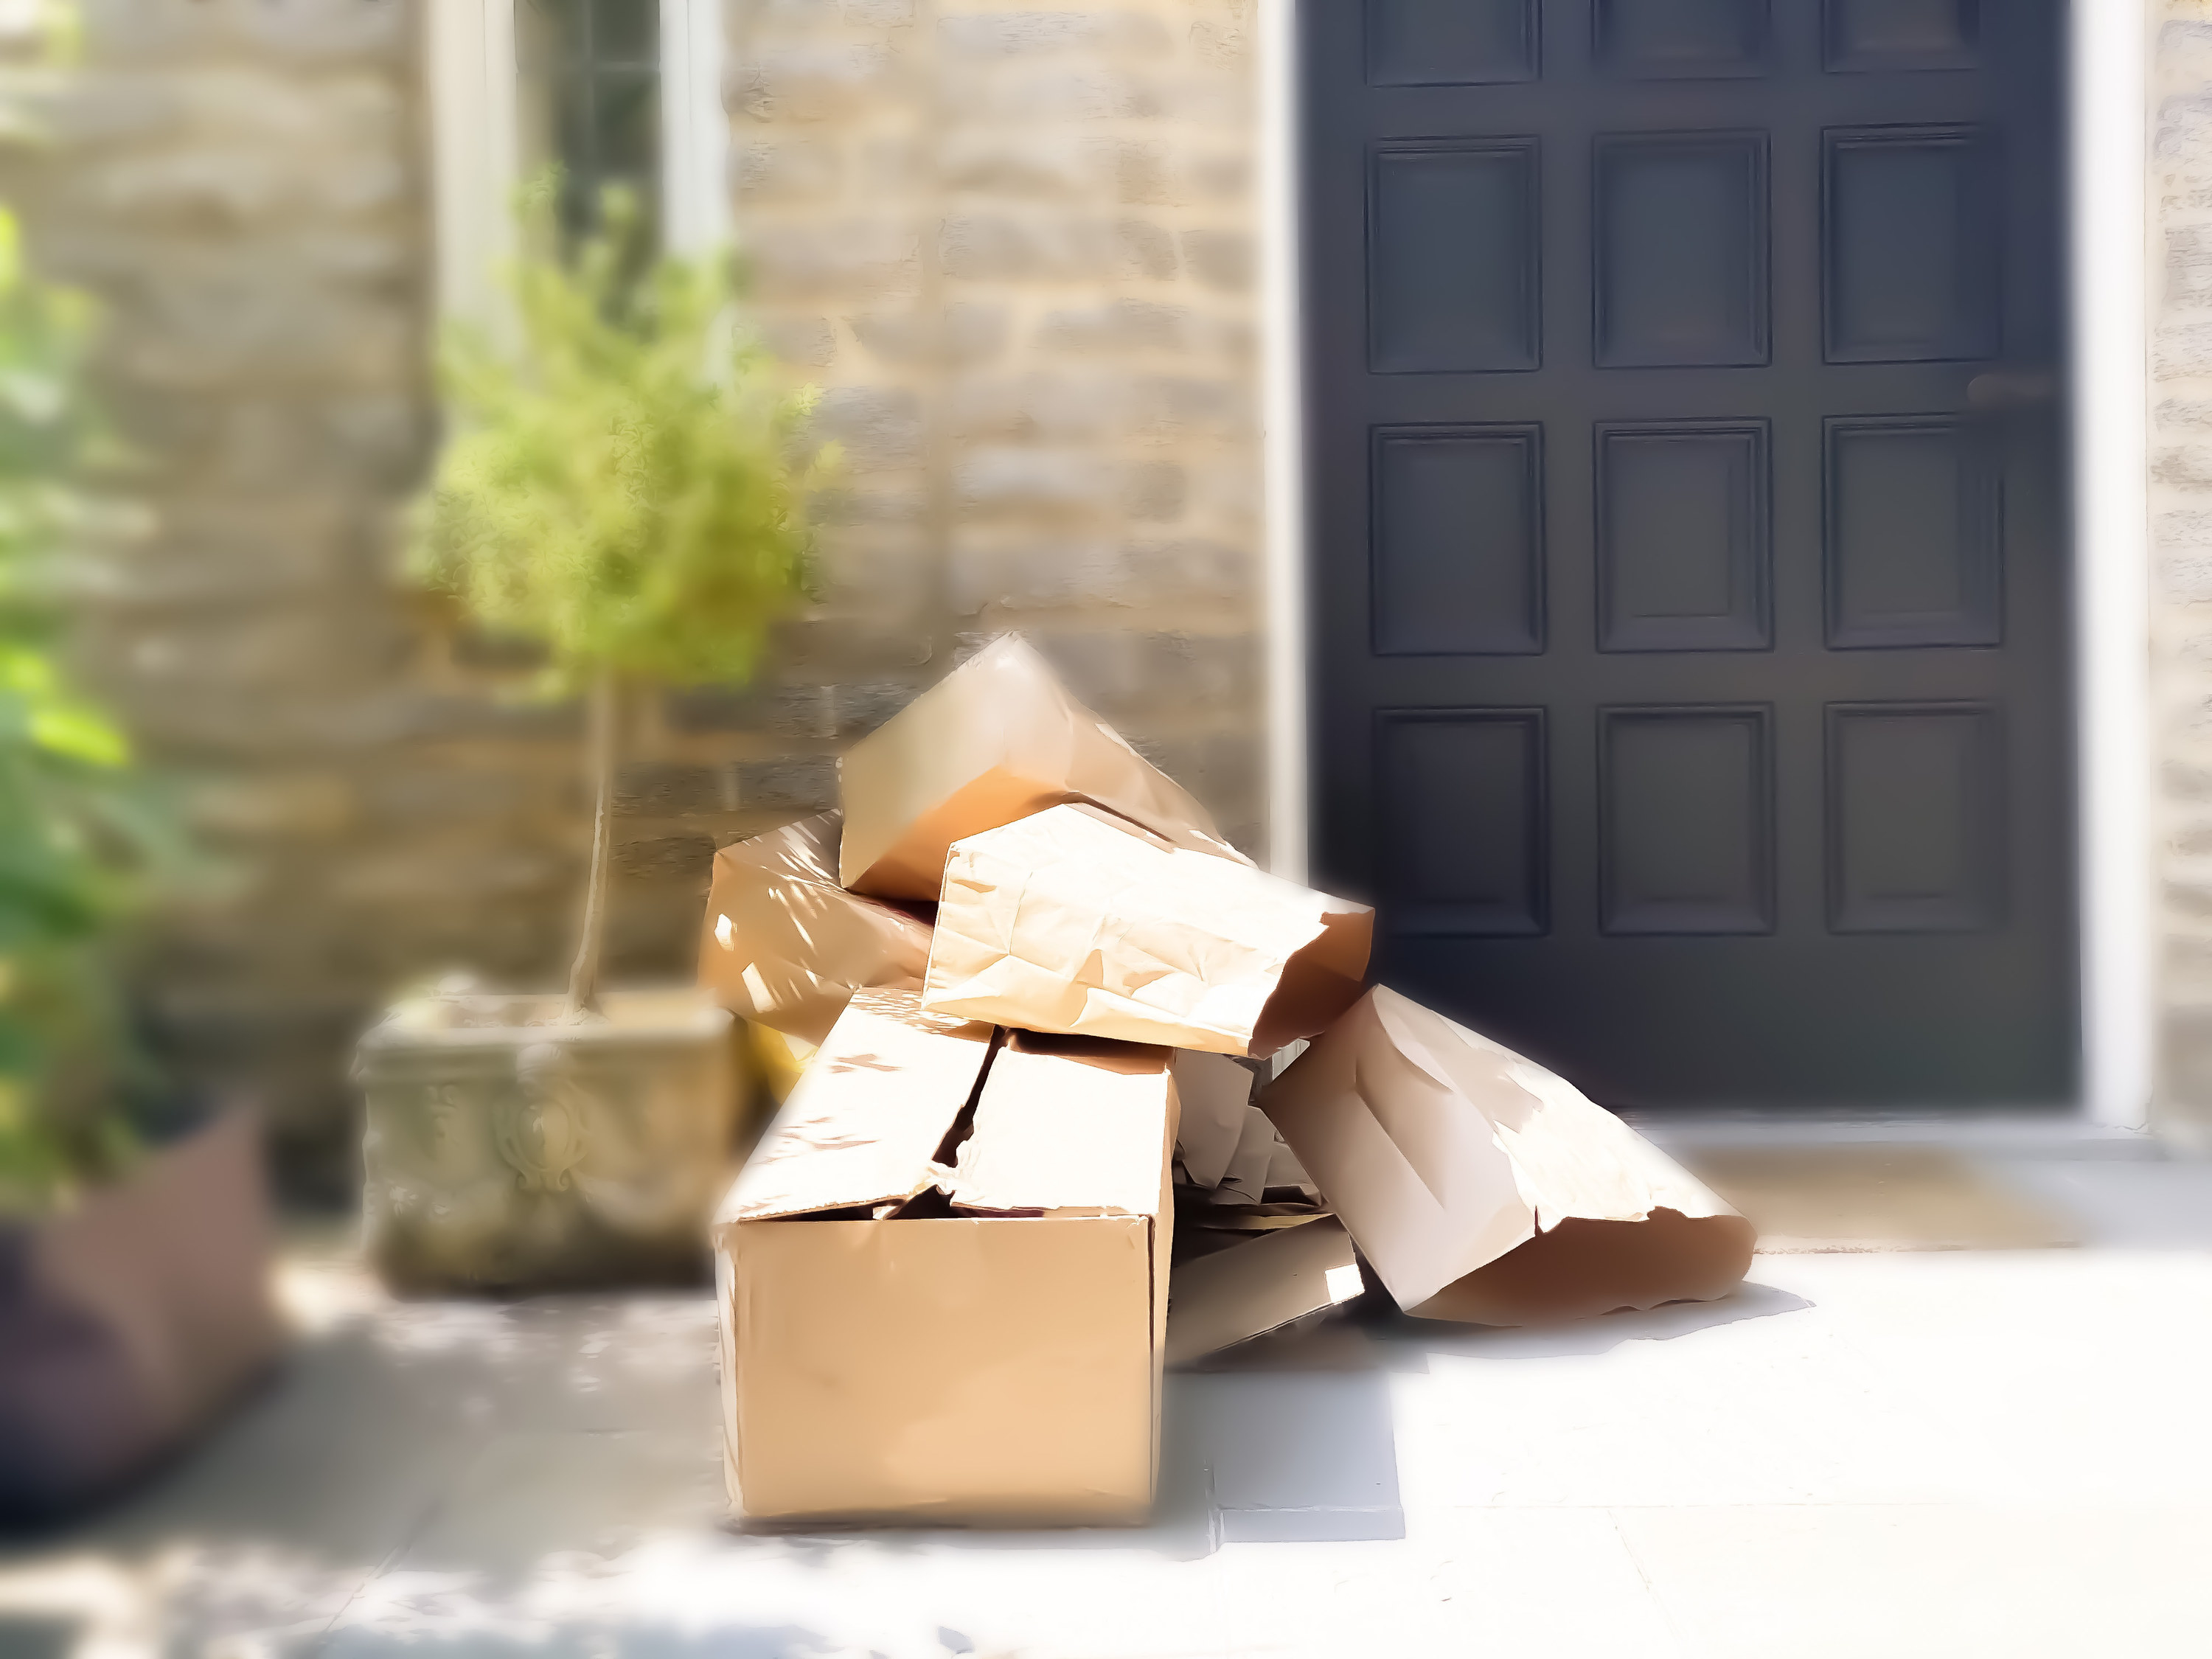 Pile of shipping boxes on a front doorstep